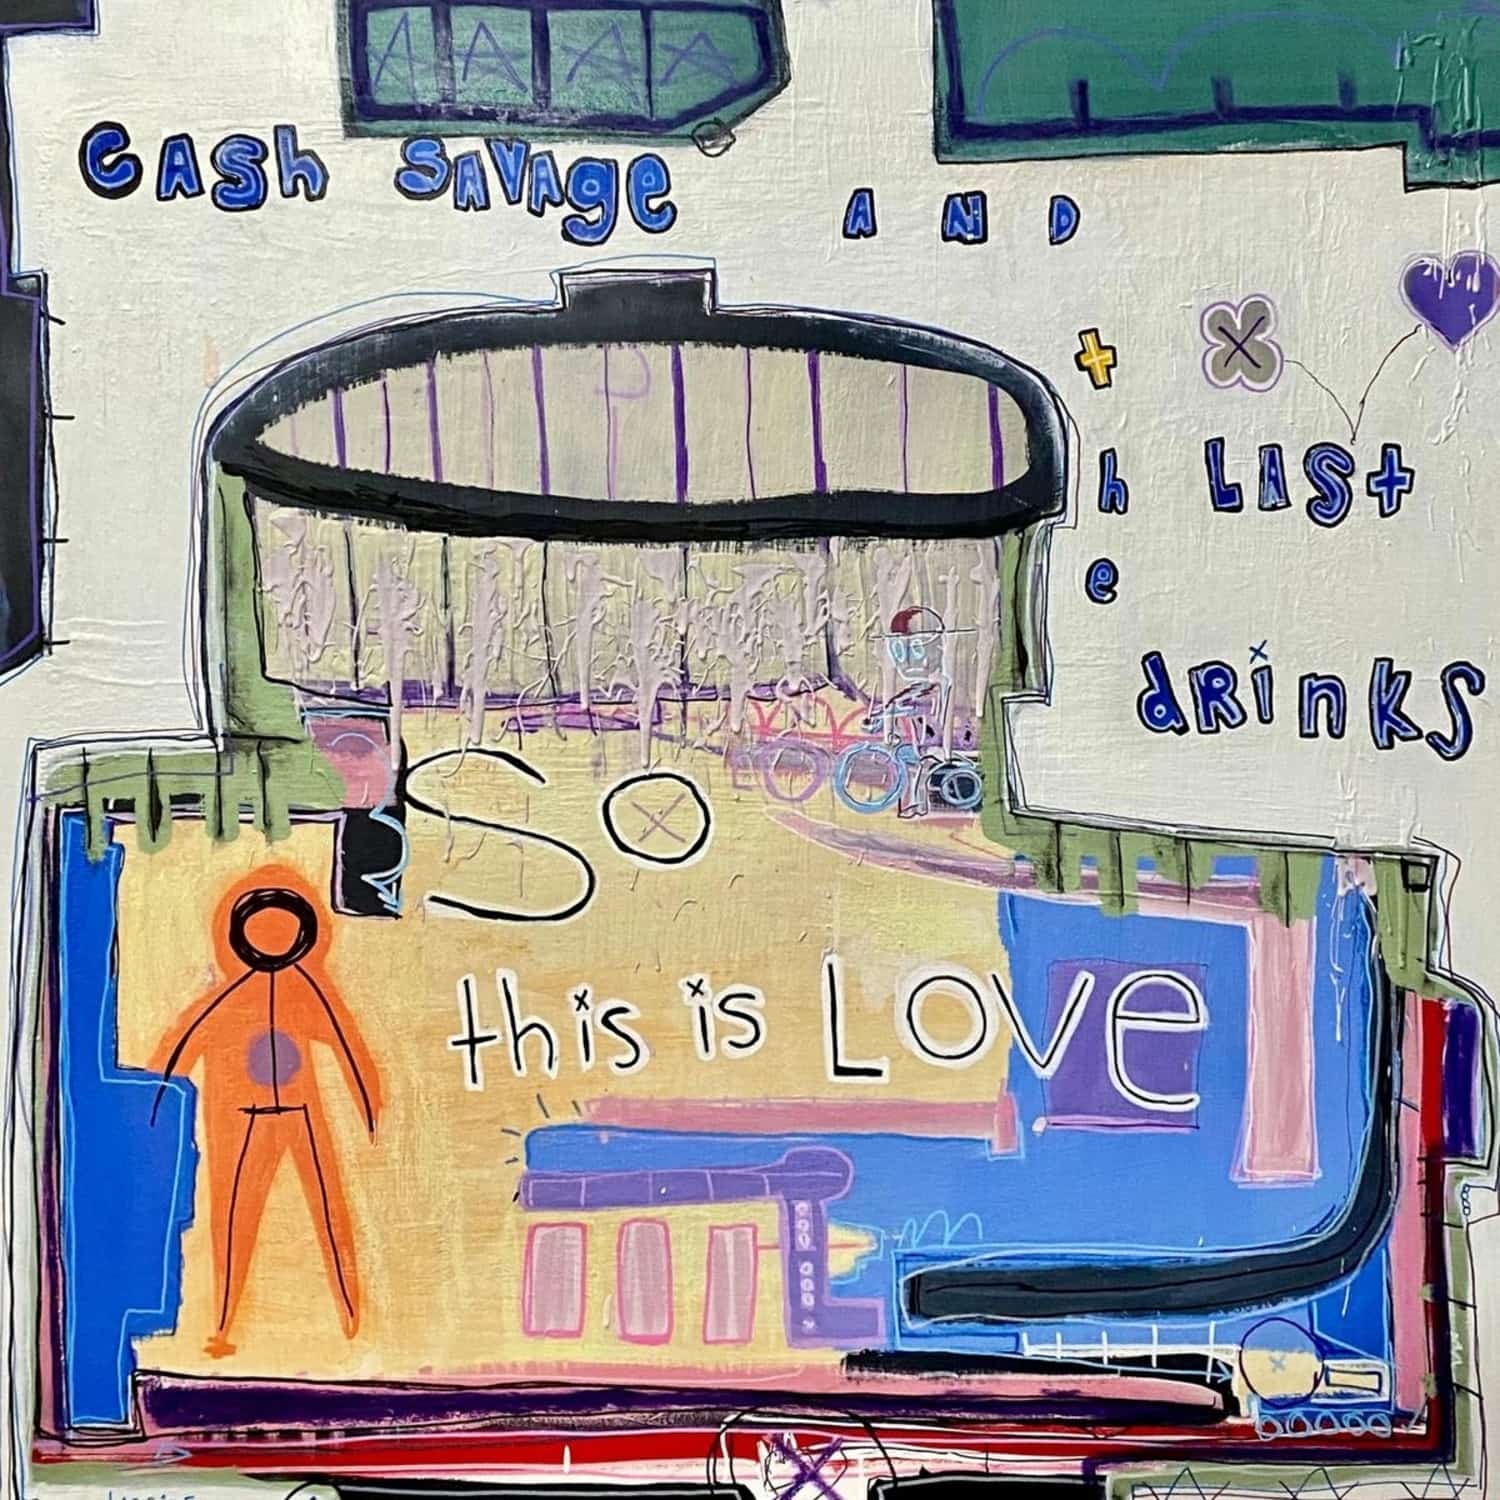 Cash Savage & The Last Drinks - SO THIS IS LOVE 